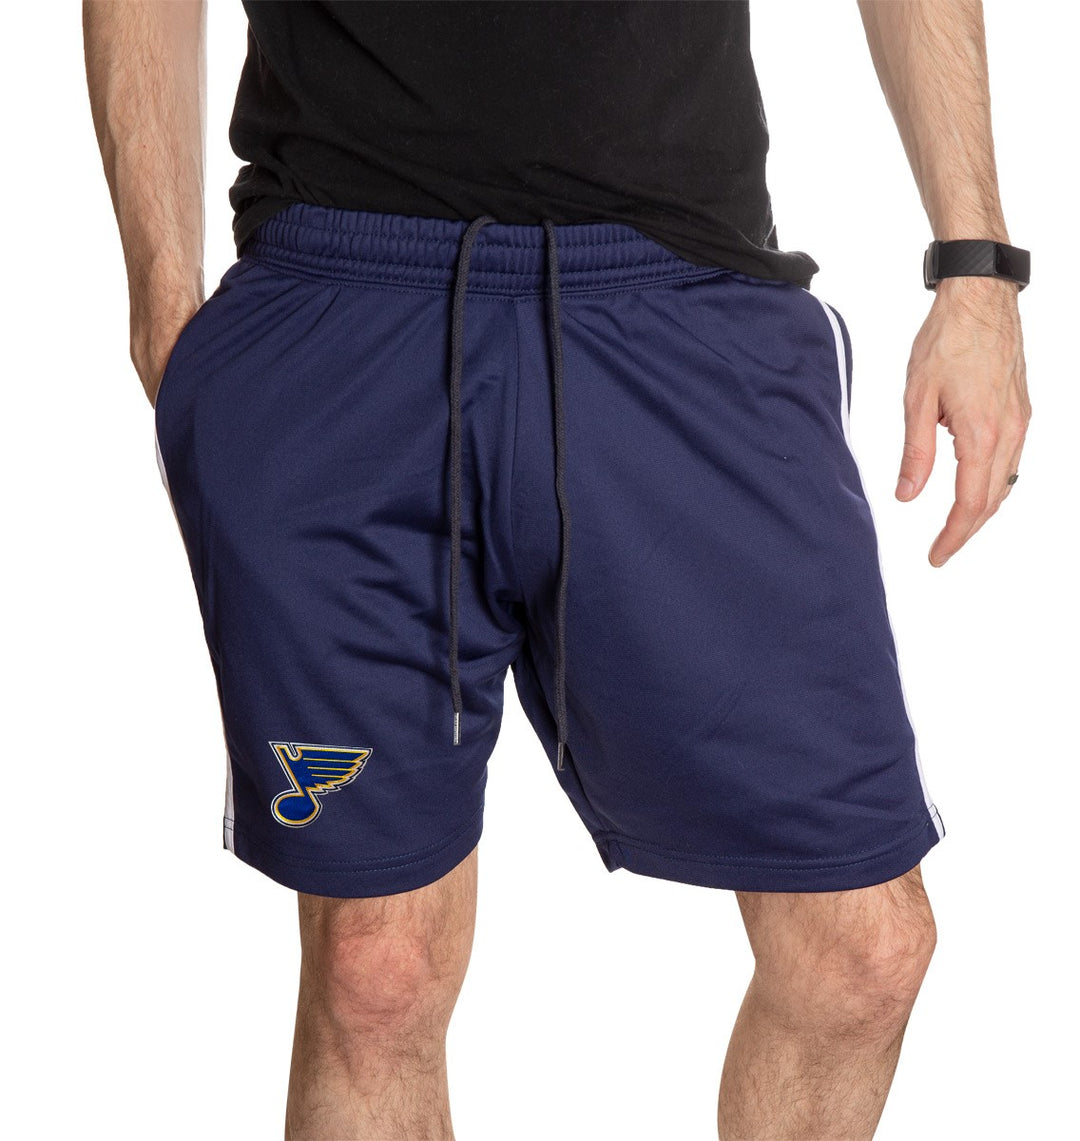 NHL Mens Official Team Two-Stripe Shorts- St. Louis Blues Full Length Front Photo Of Man Wearing Shorts WIth Hand In Pocket